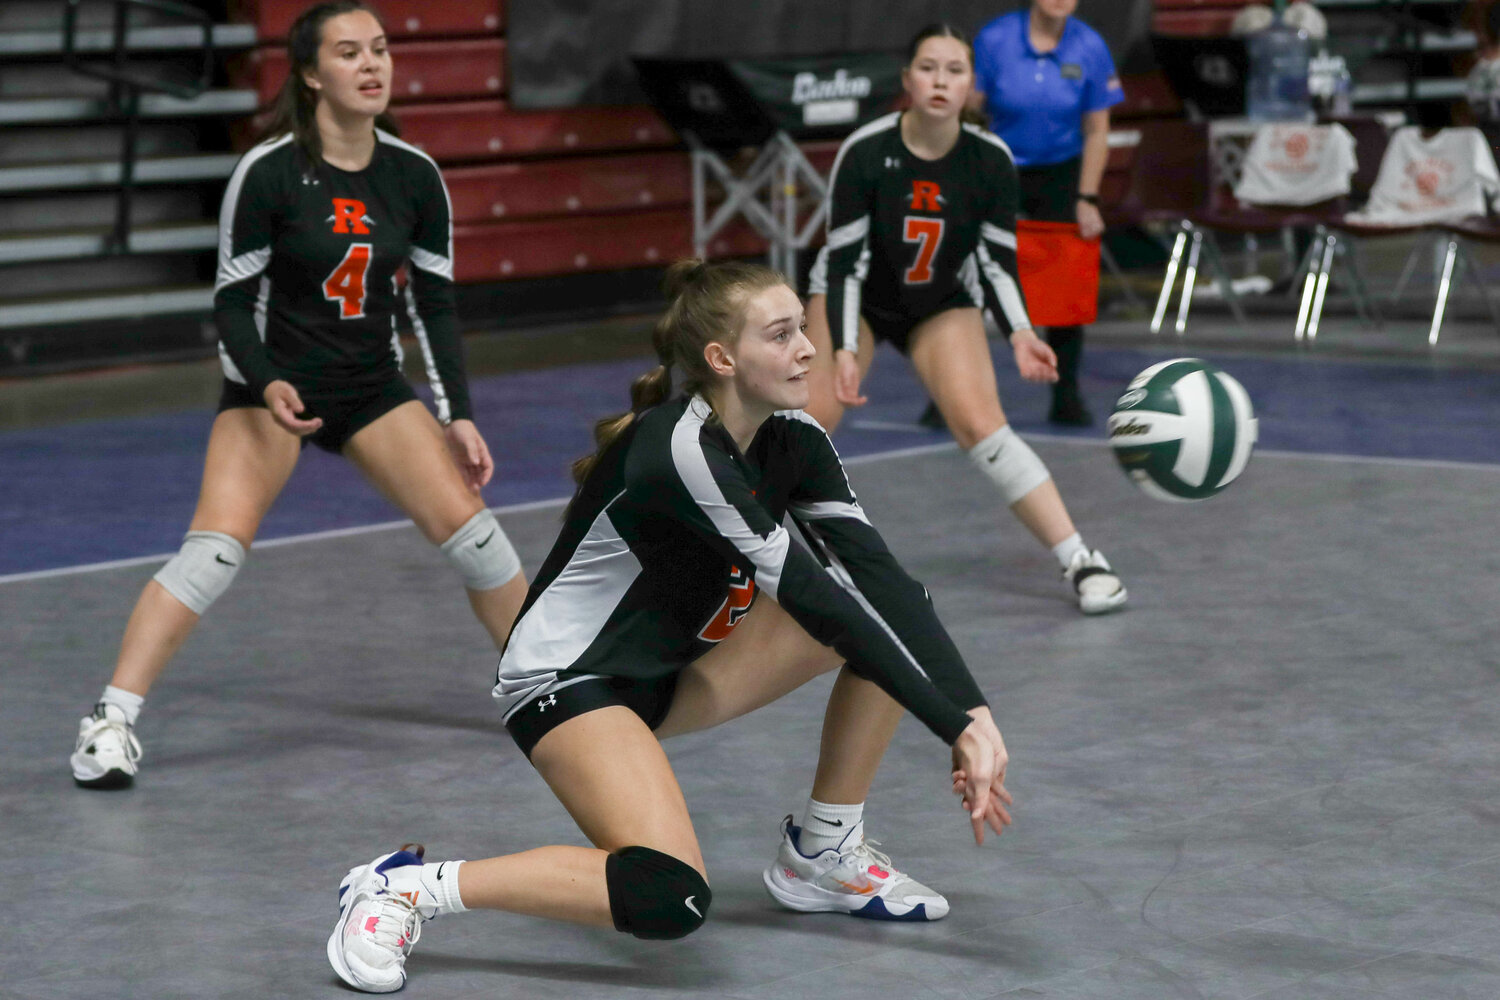 Anika Plowman digs a ball during Rainier's match against Adna in the state quarterfinals on Nov. 8 in Yakima.